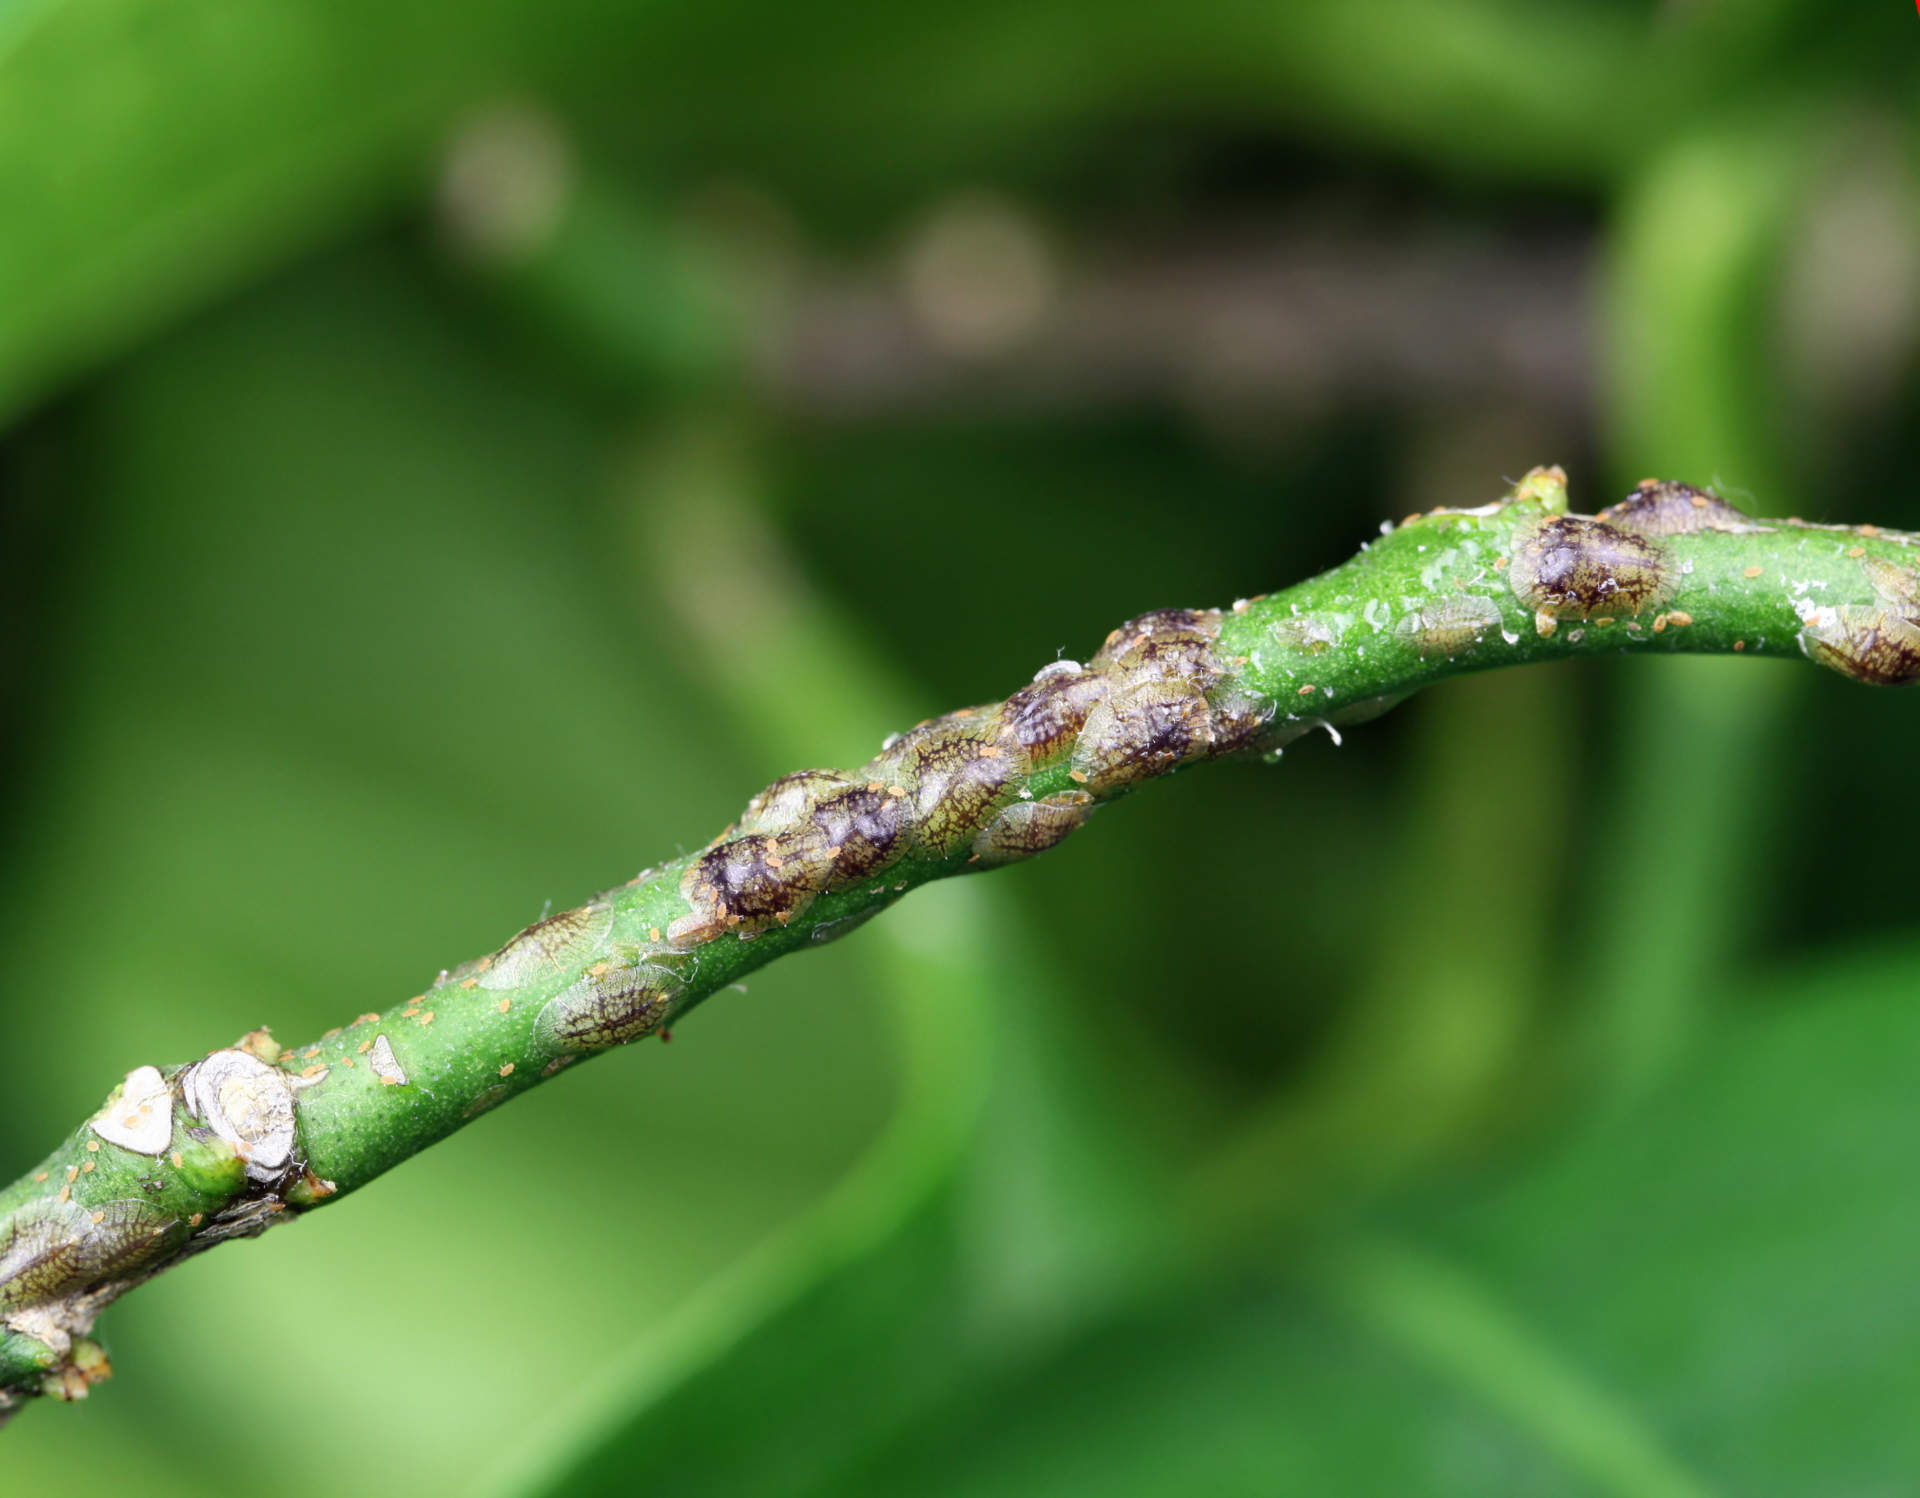 Citrus infested by scale insects